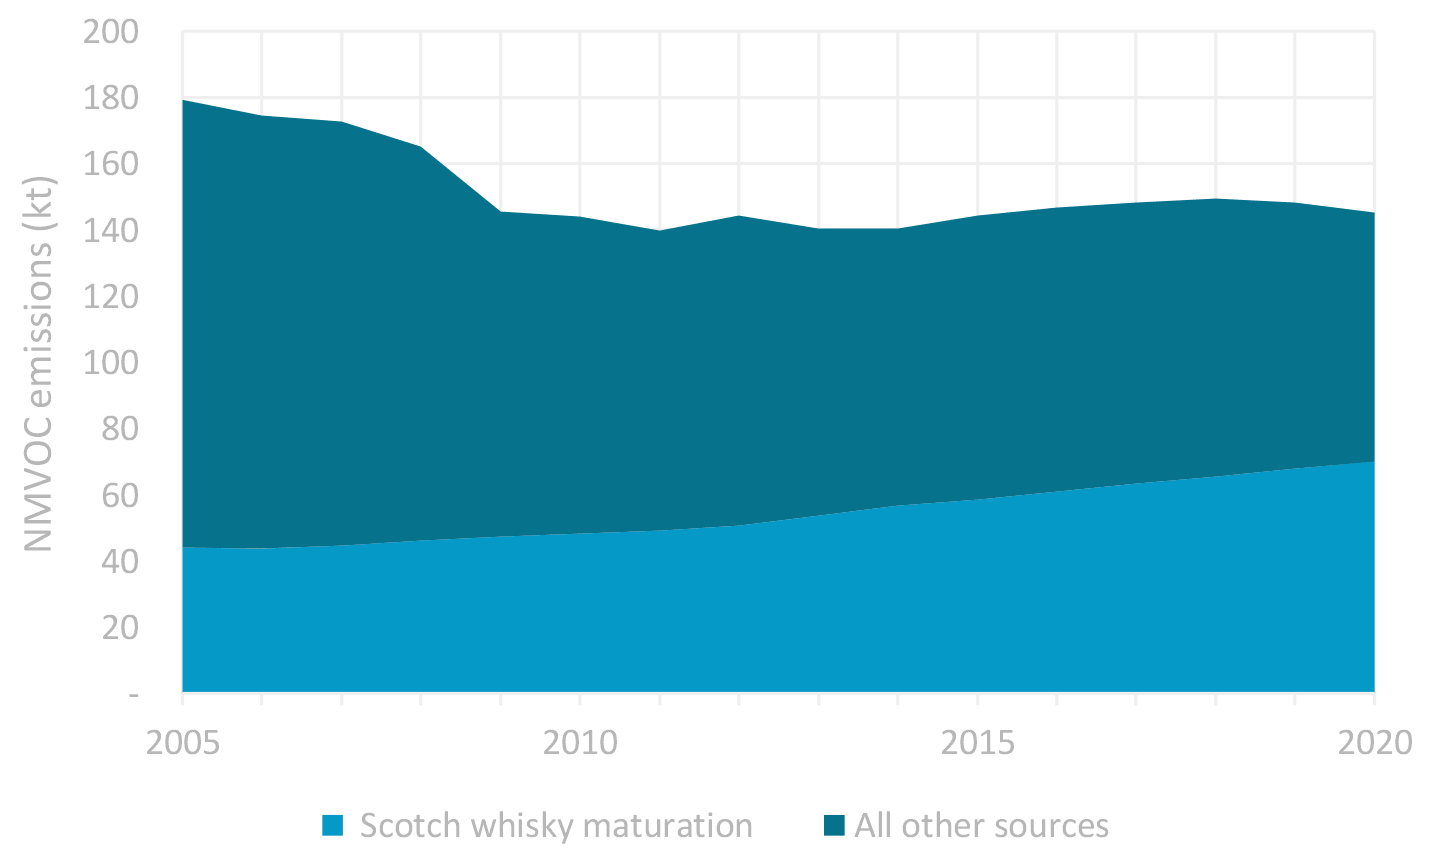 Changes in NMVOC emissions originating from Scotch whisky maturation between 2005 and 2020 as a proportion of total NMVOC emissions.